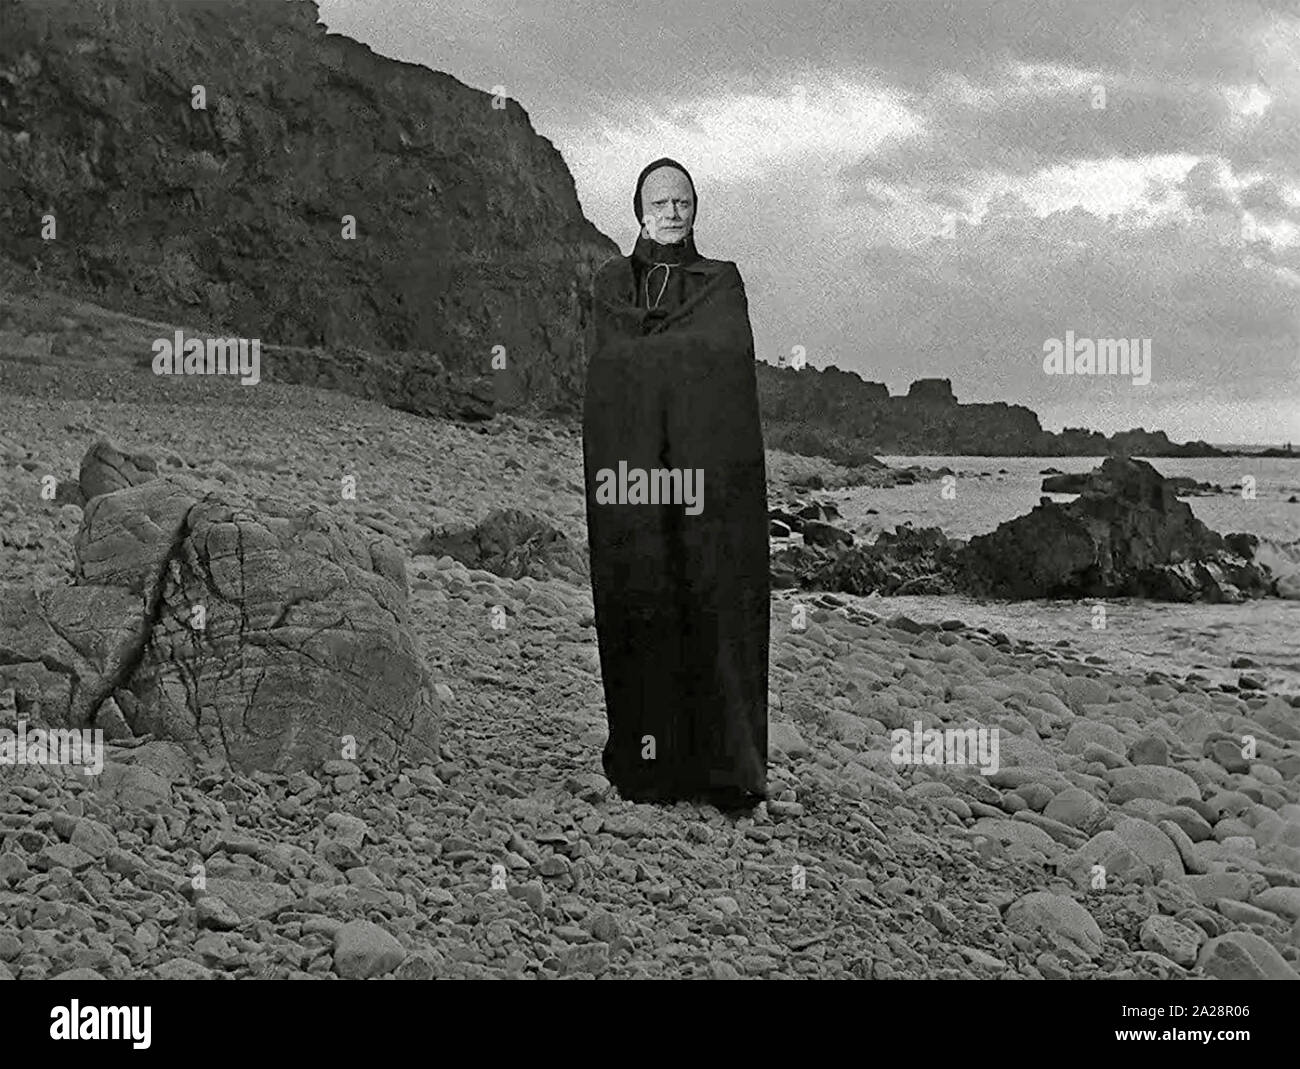 THE SEVENTH SEAL 1957 Svensk Filmindustri production with Bengt Ekerot as Death Stock Photo